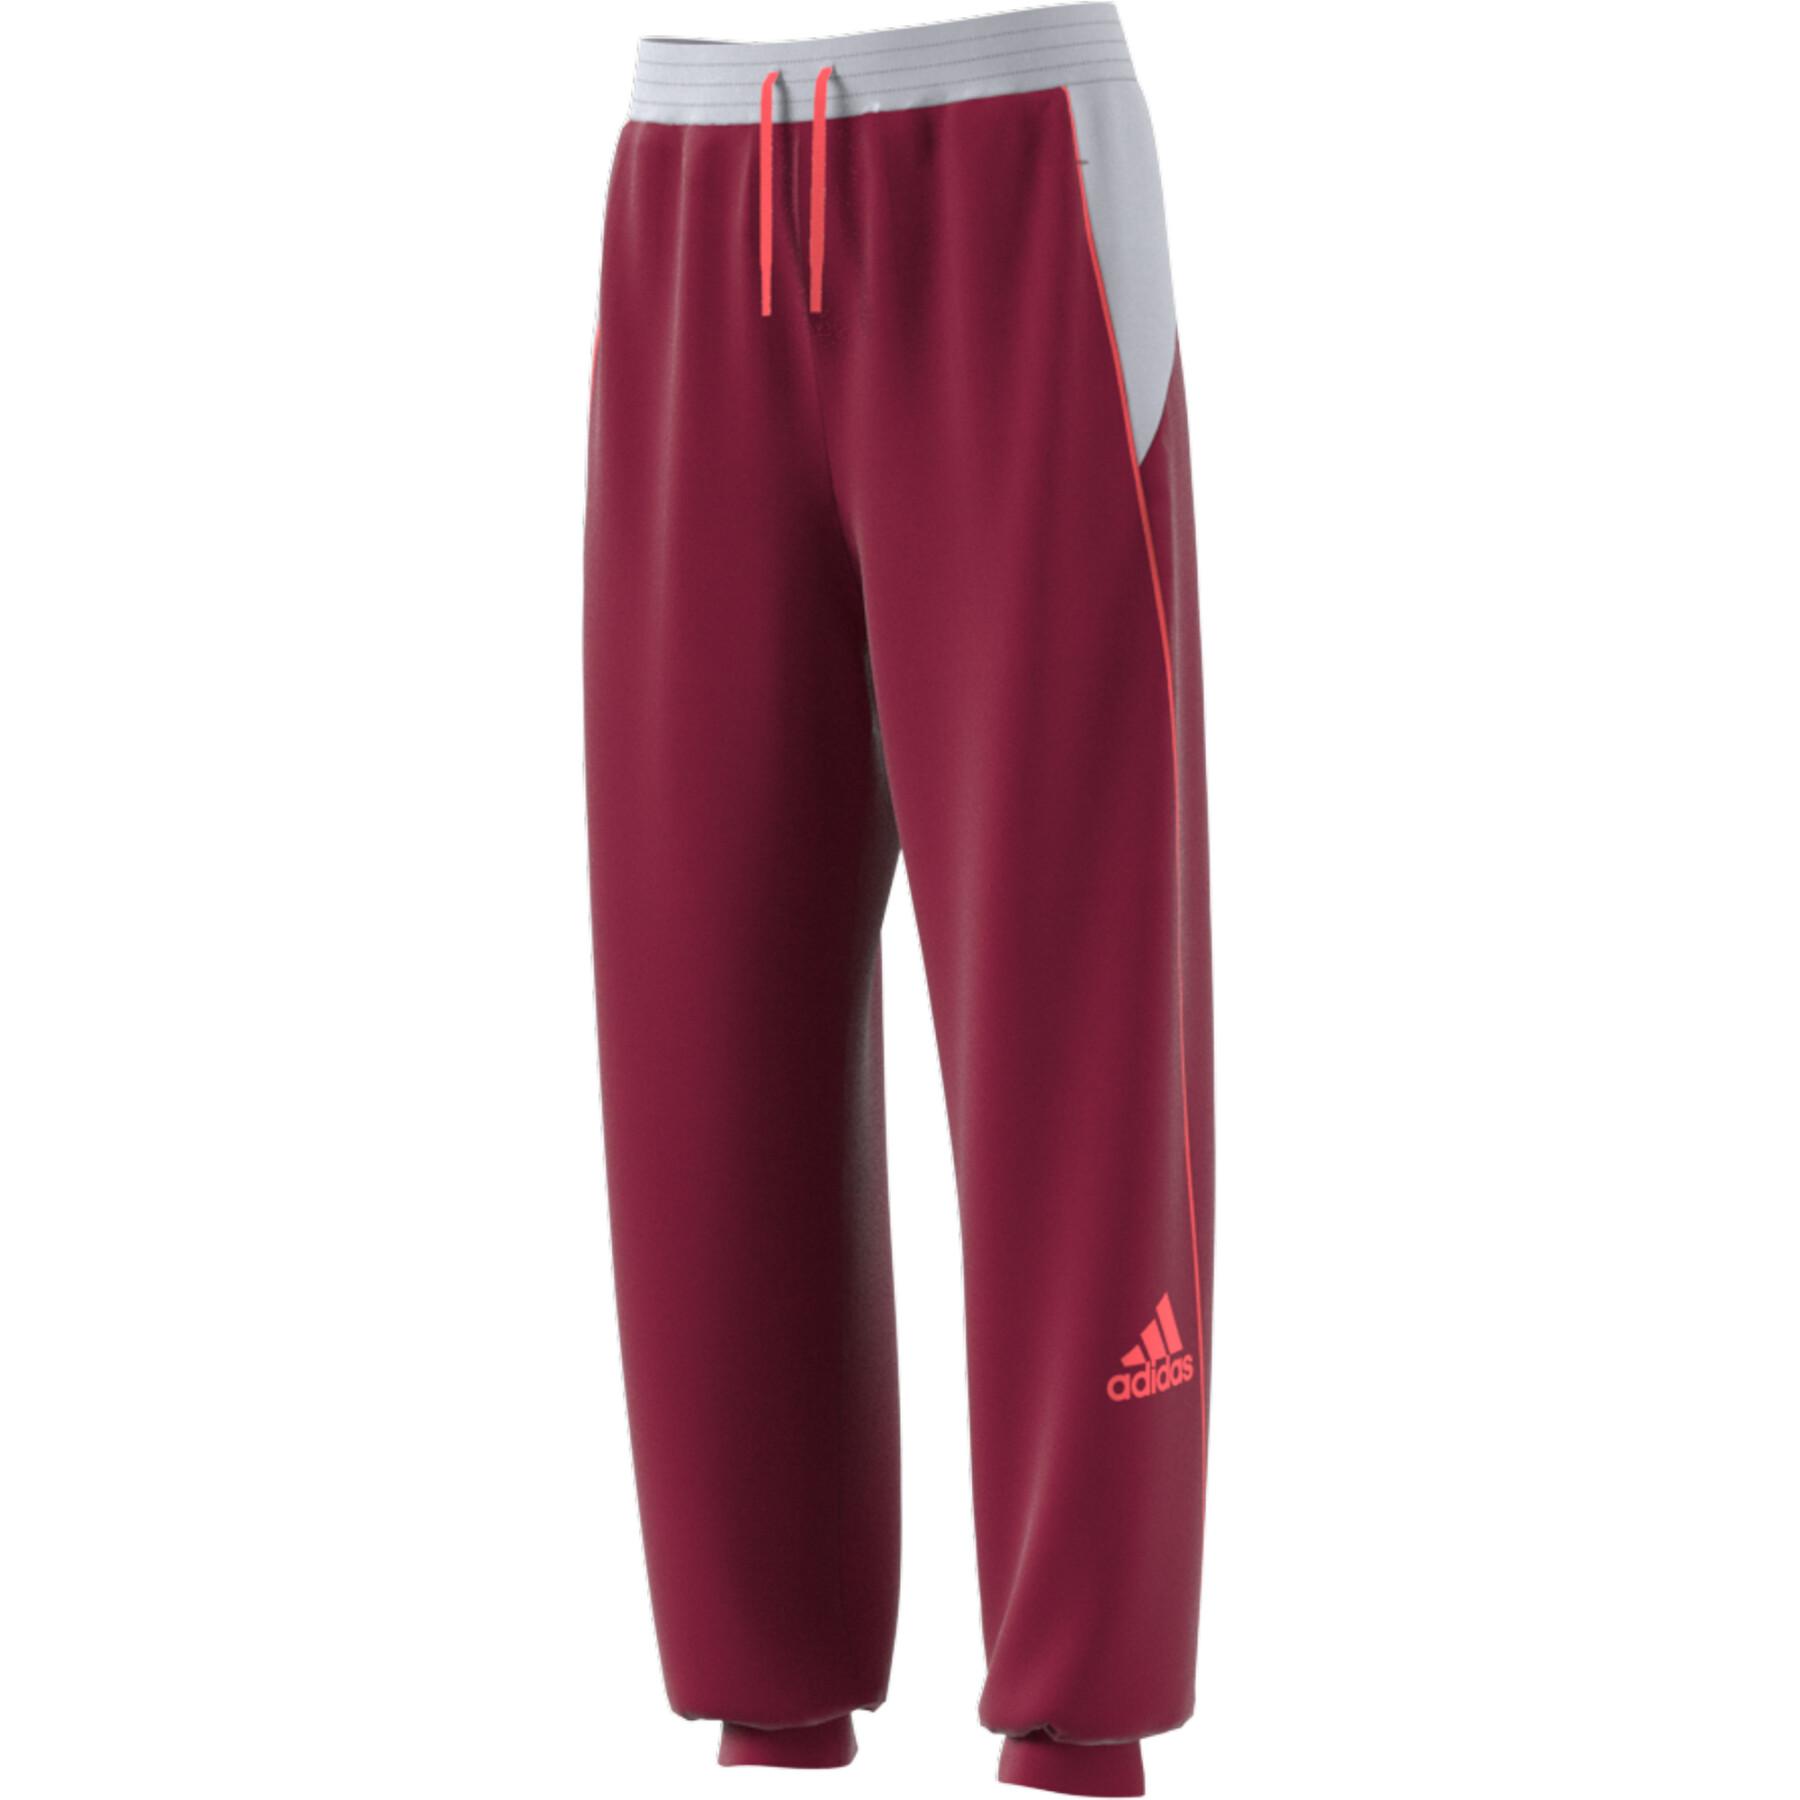 Women's trousers adidas Essentials Colorblock Loose